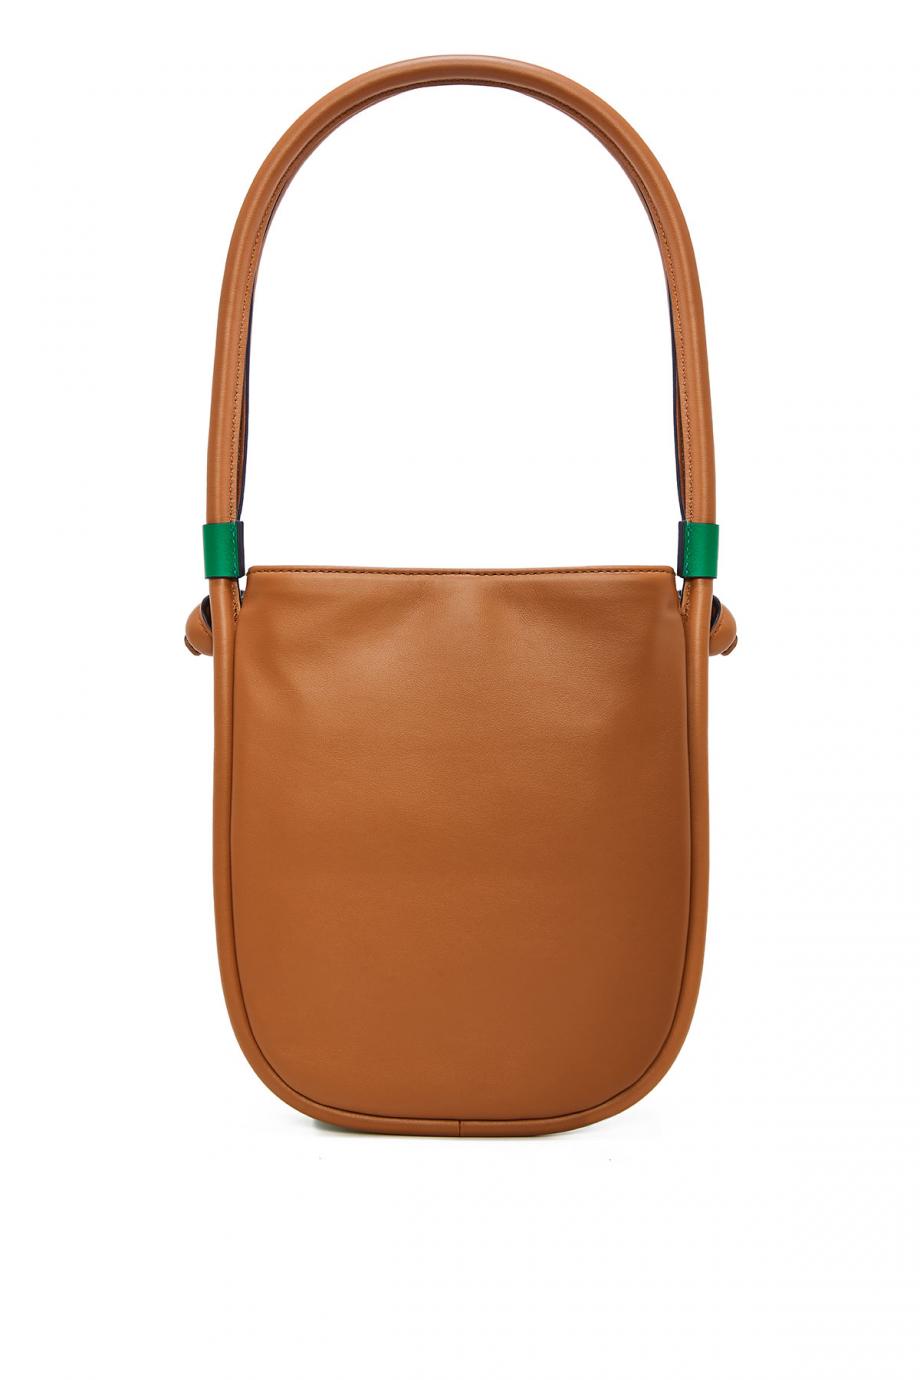 Marcel Knot small leather bag